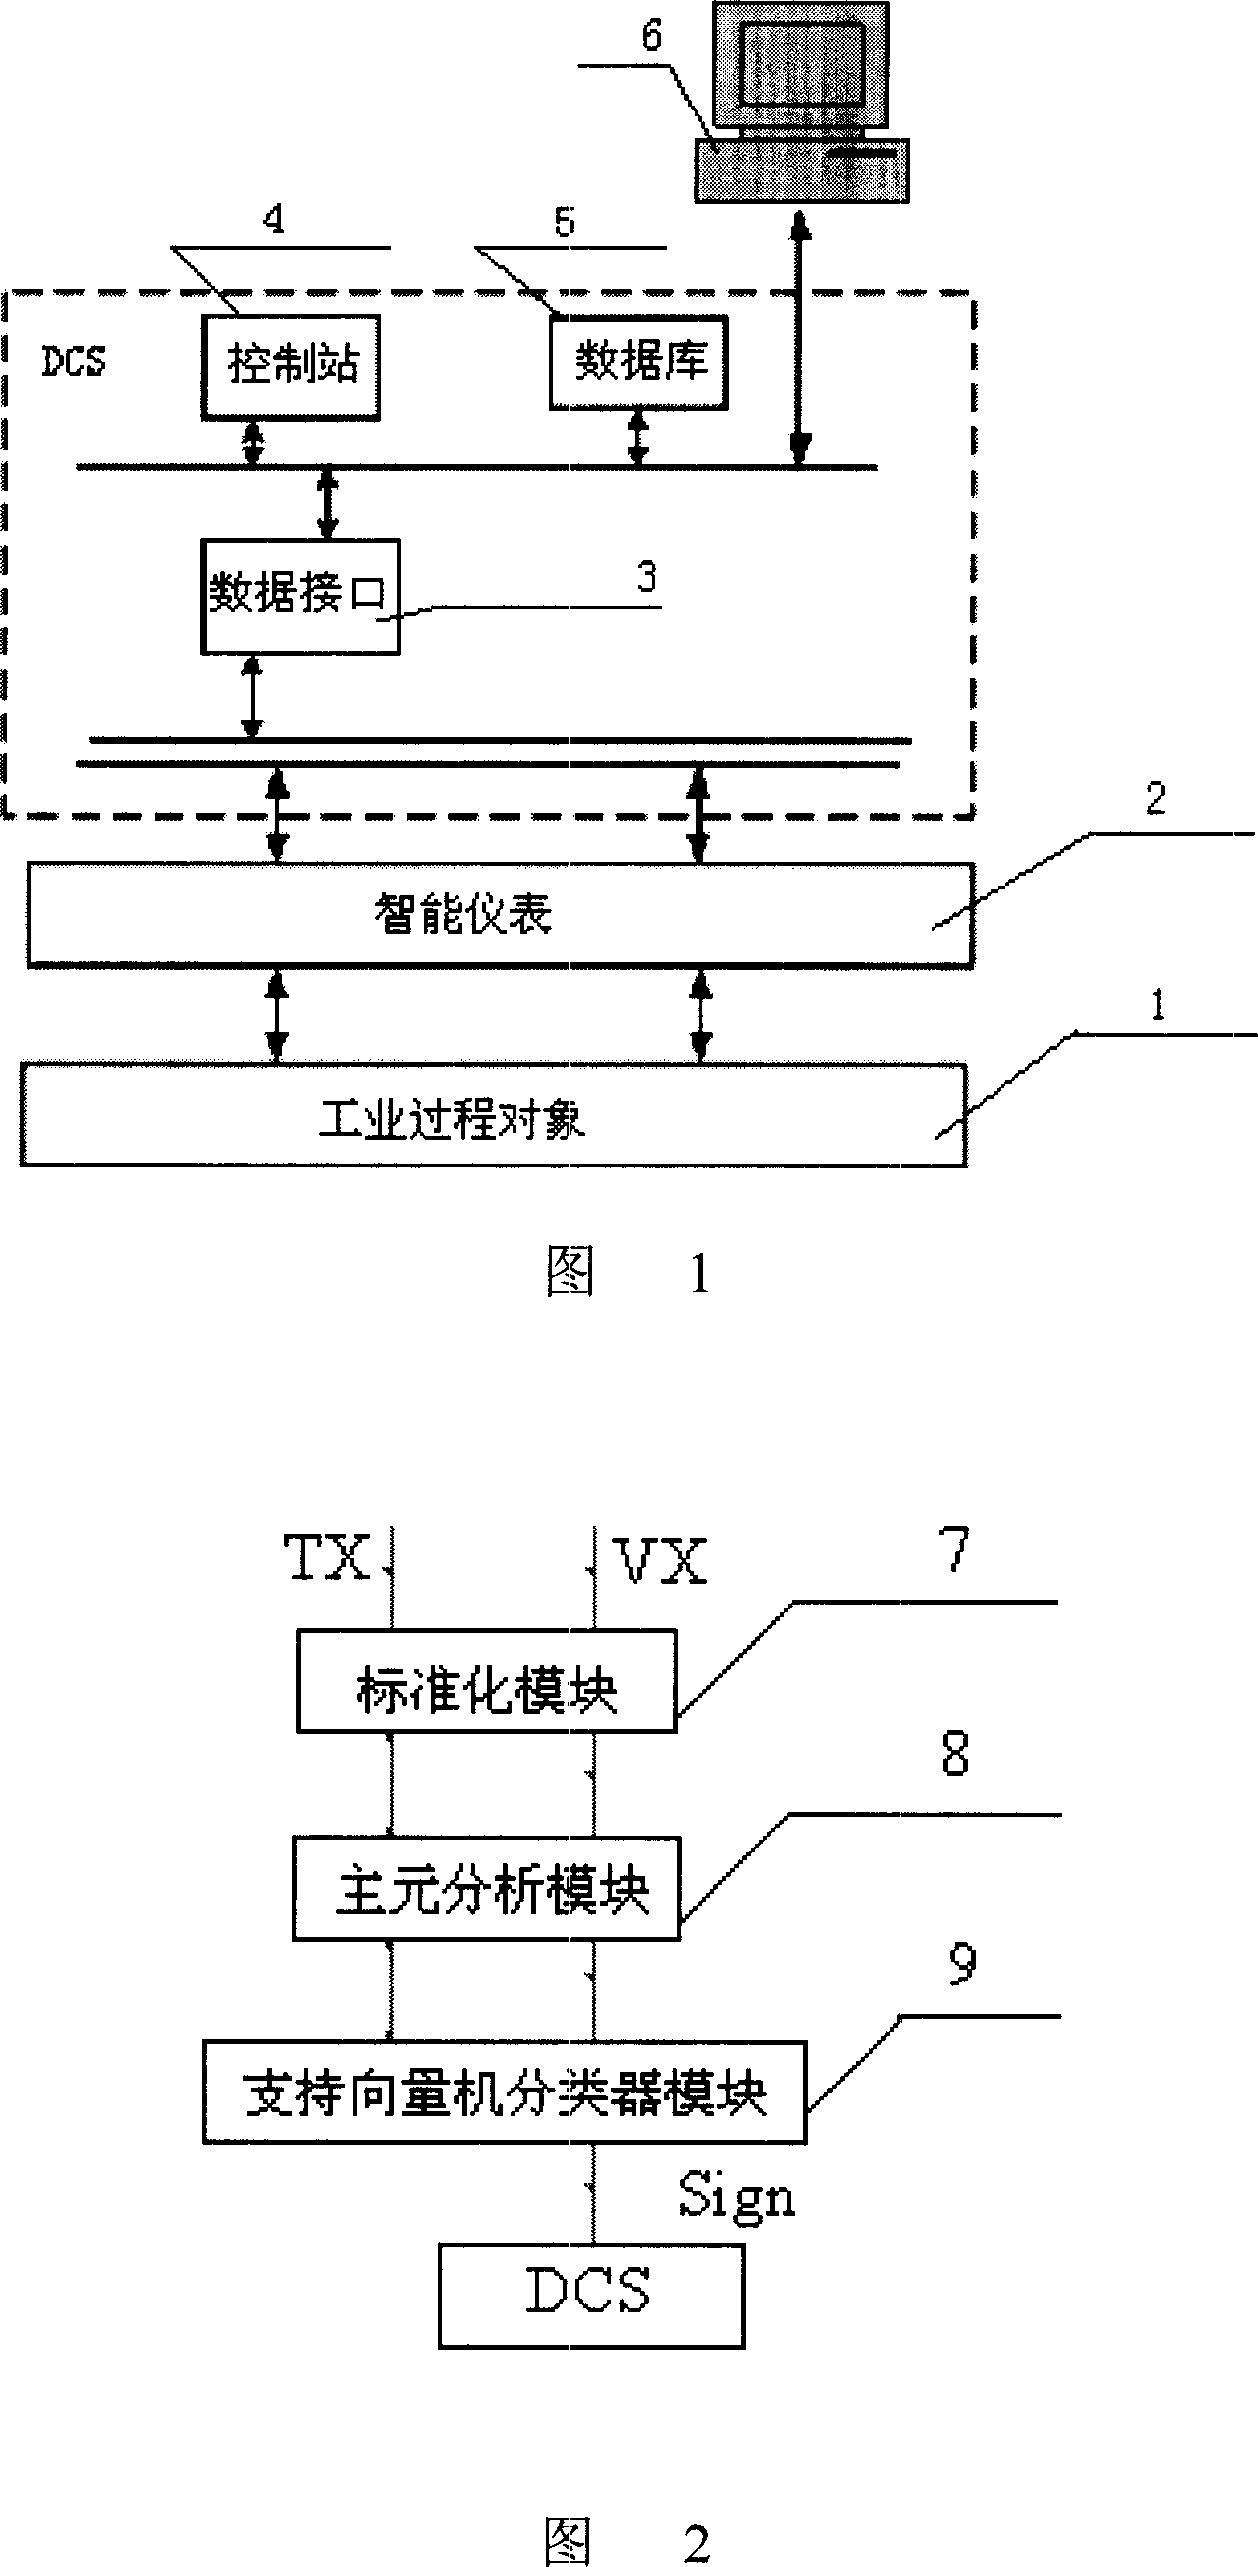 Fault diagnostic system and method for under industrial producing process small sample condition